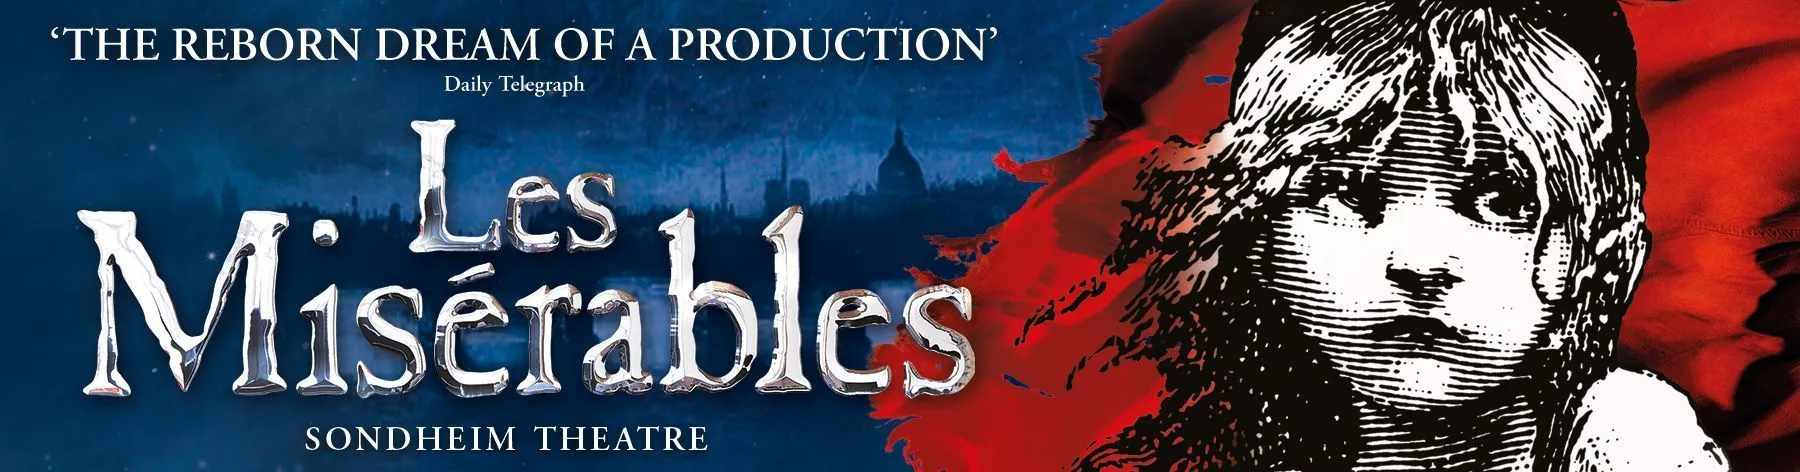 Les Miserables is based on a classic novel by Victor Hugo.